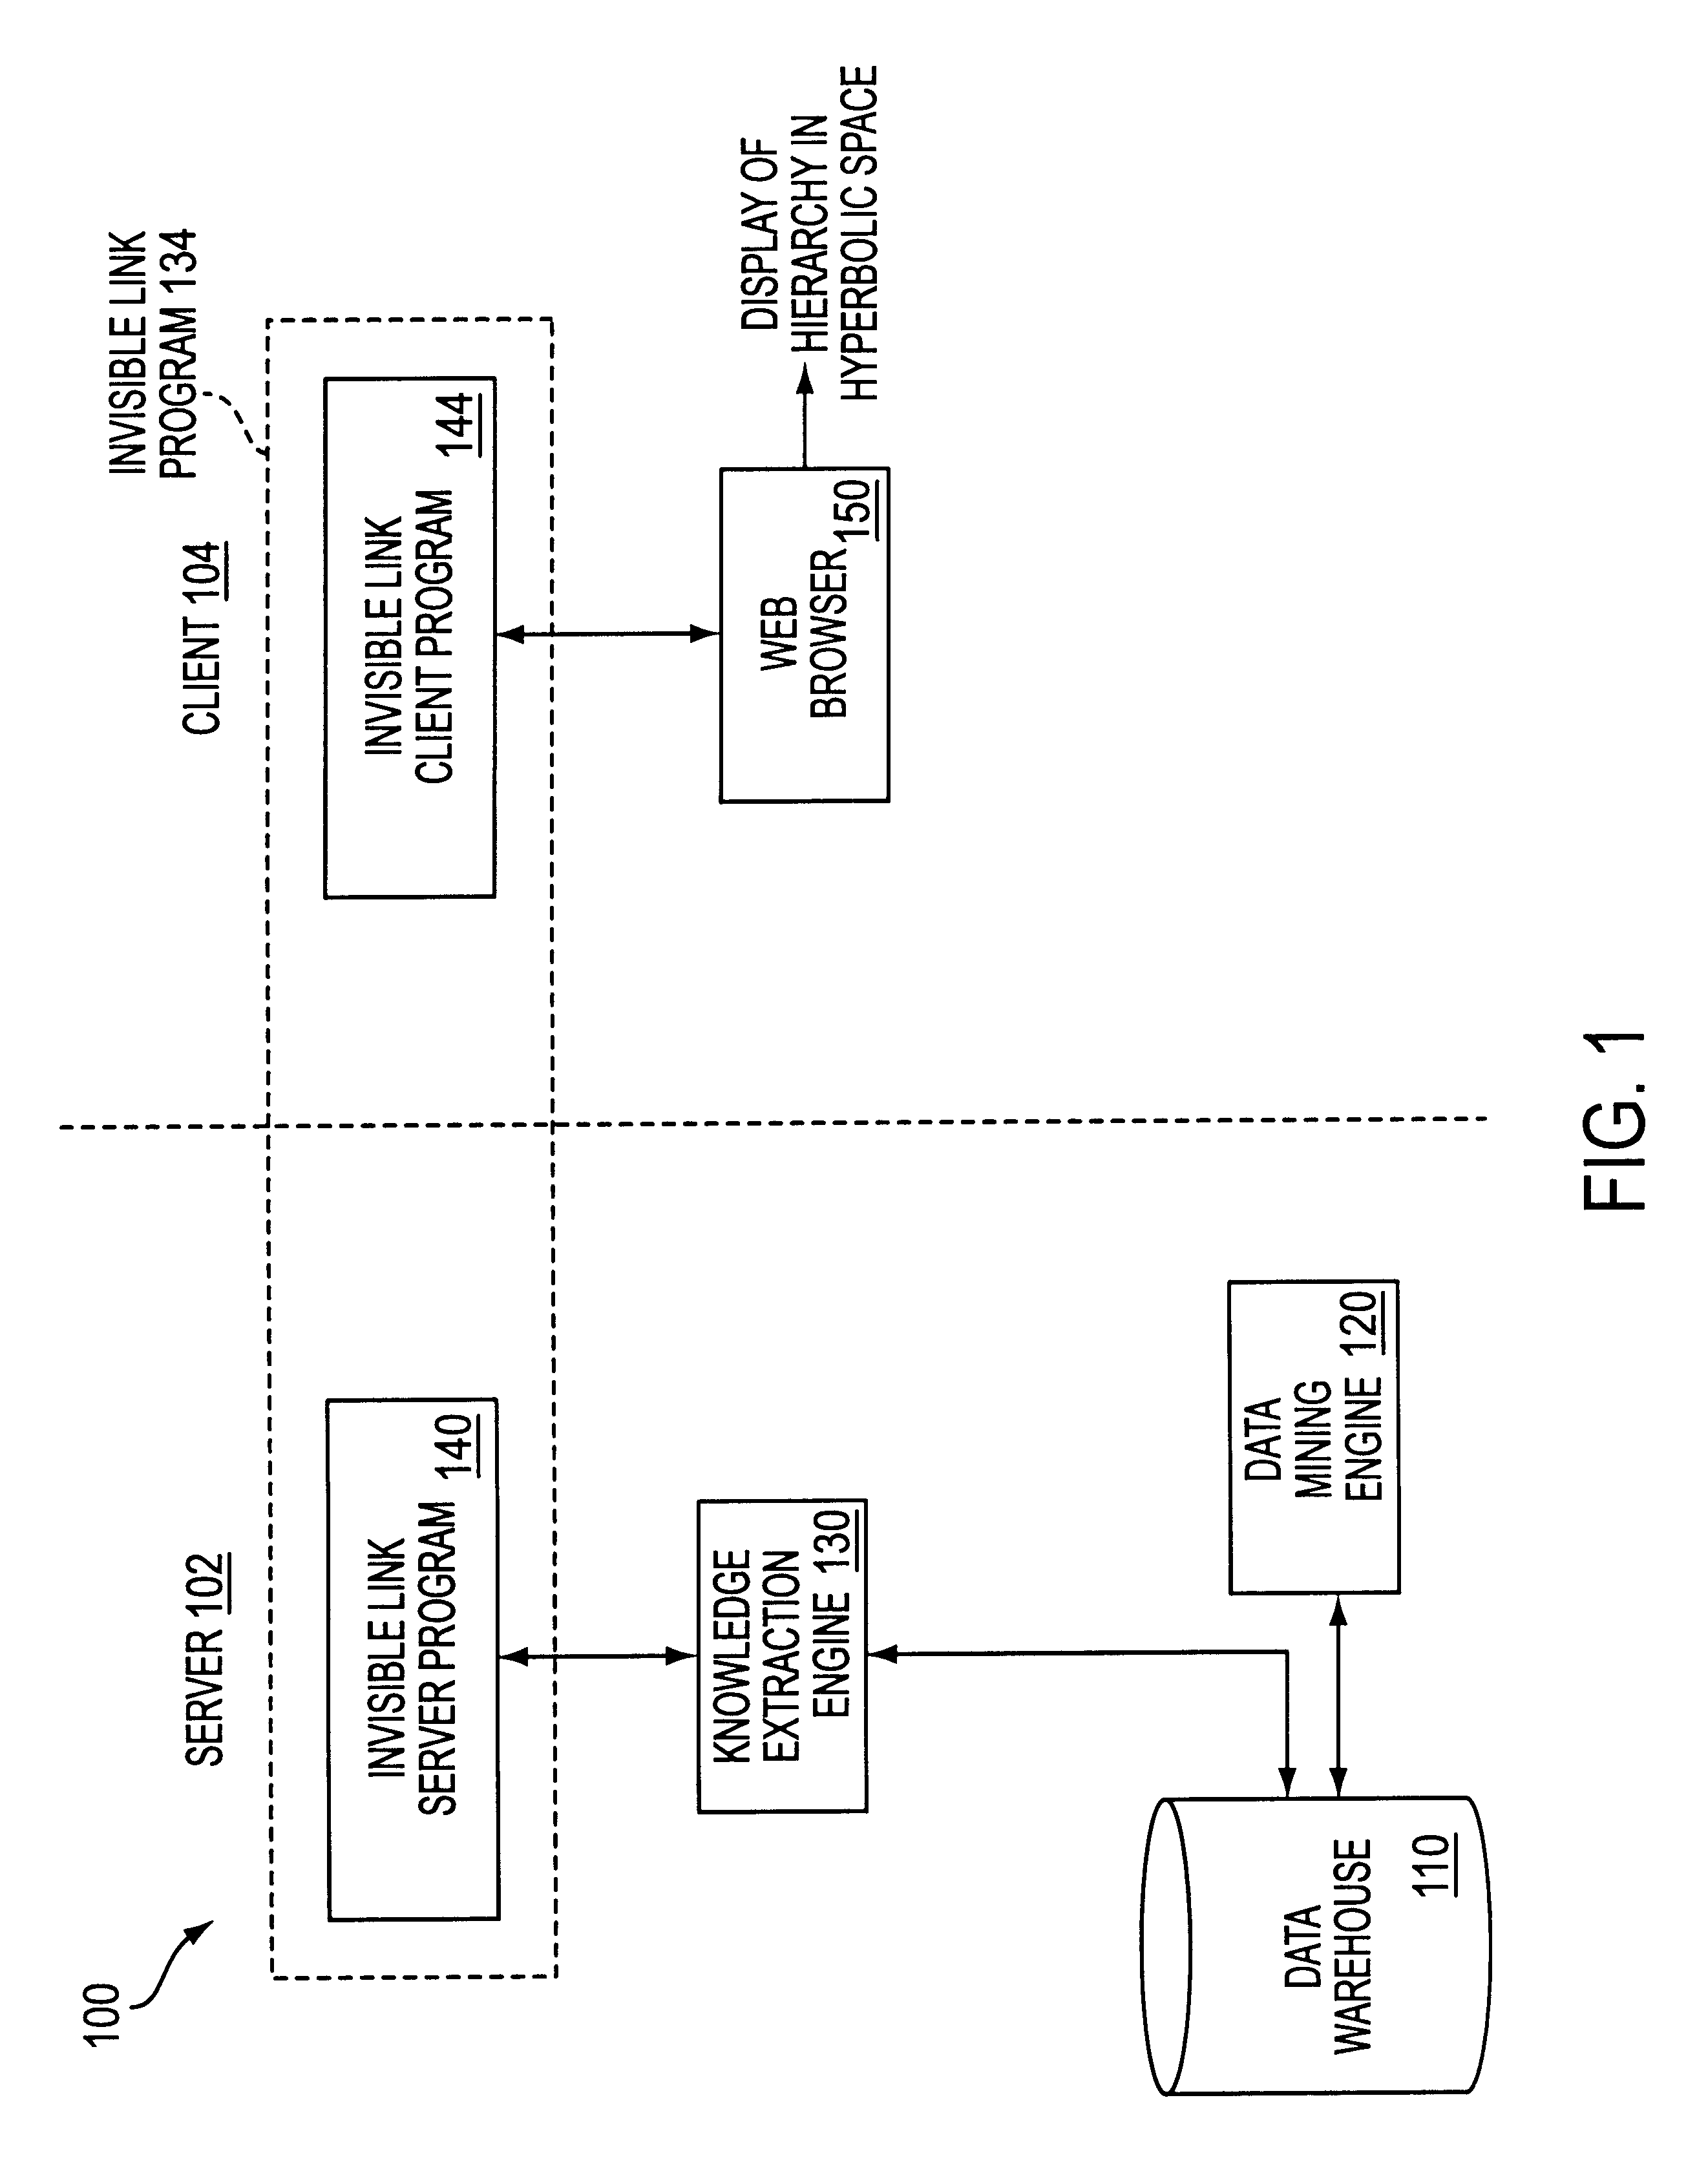 Invisible link visualization method and system in a hyperbolic space